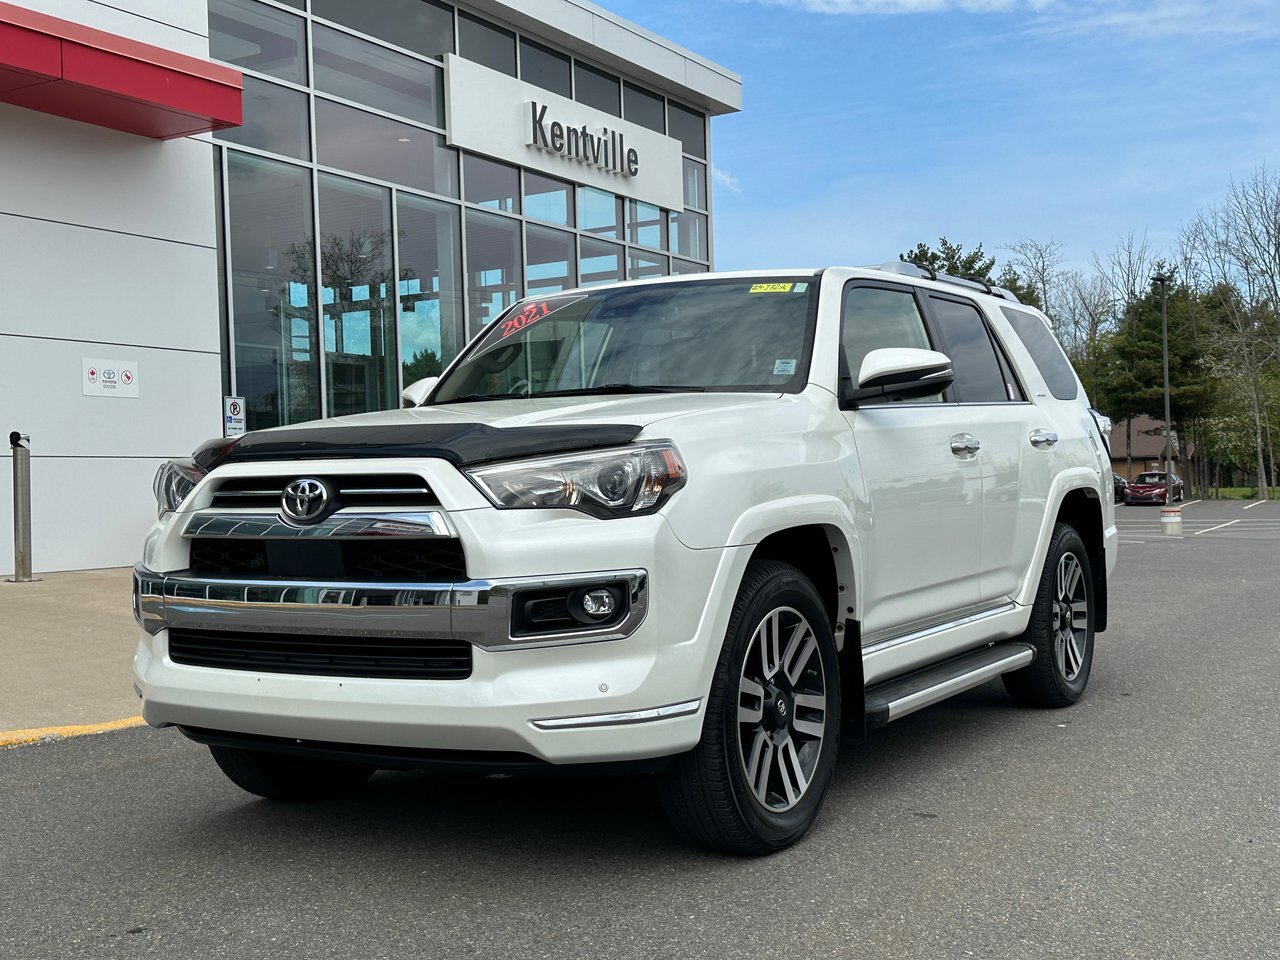 2021 Toyota 4Runner LA42 Certified Pre-owned with brand new rear brake